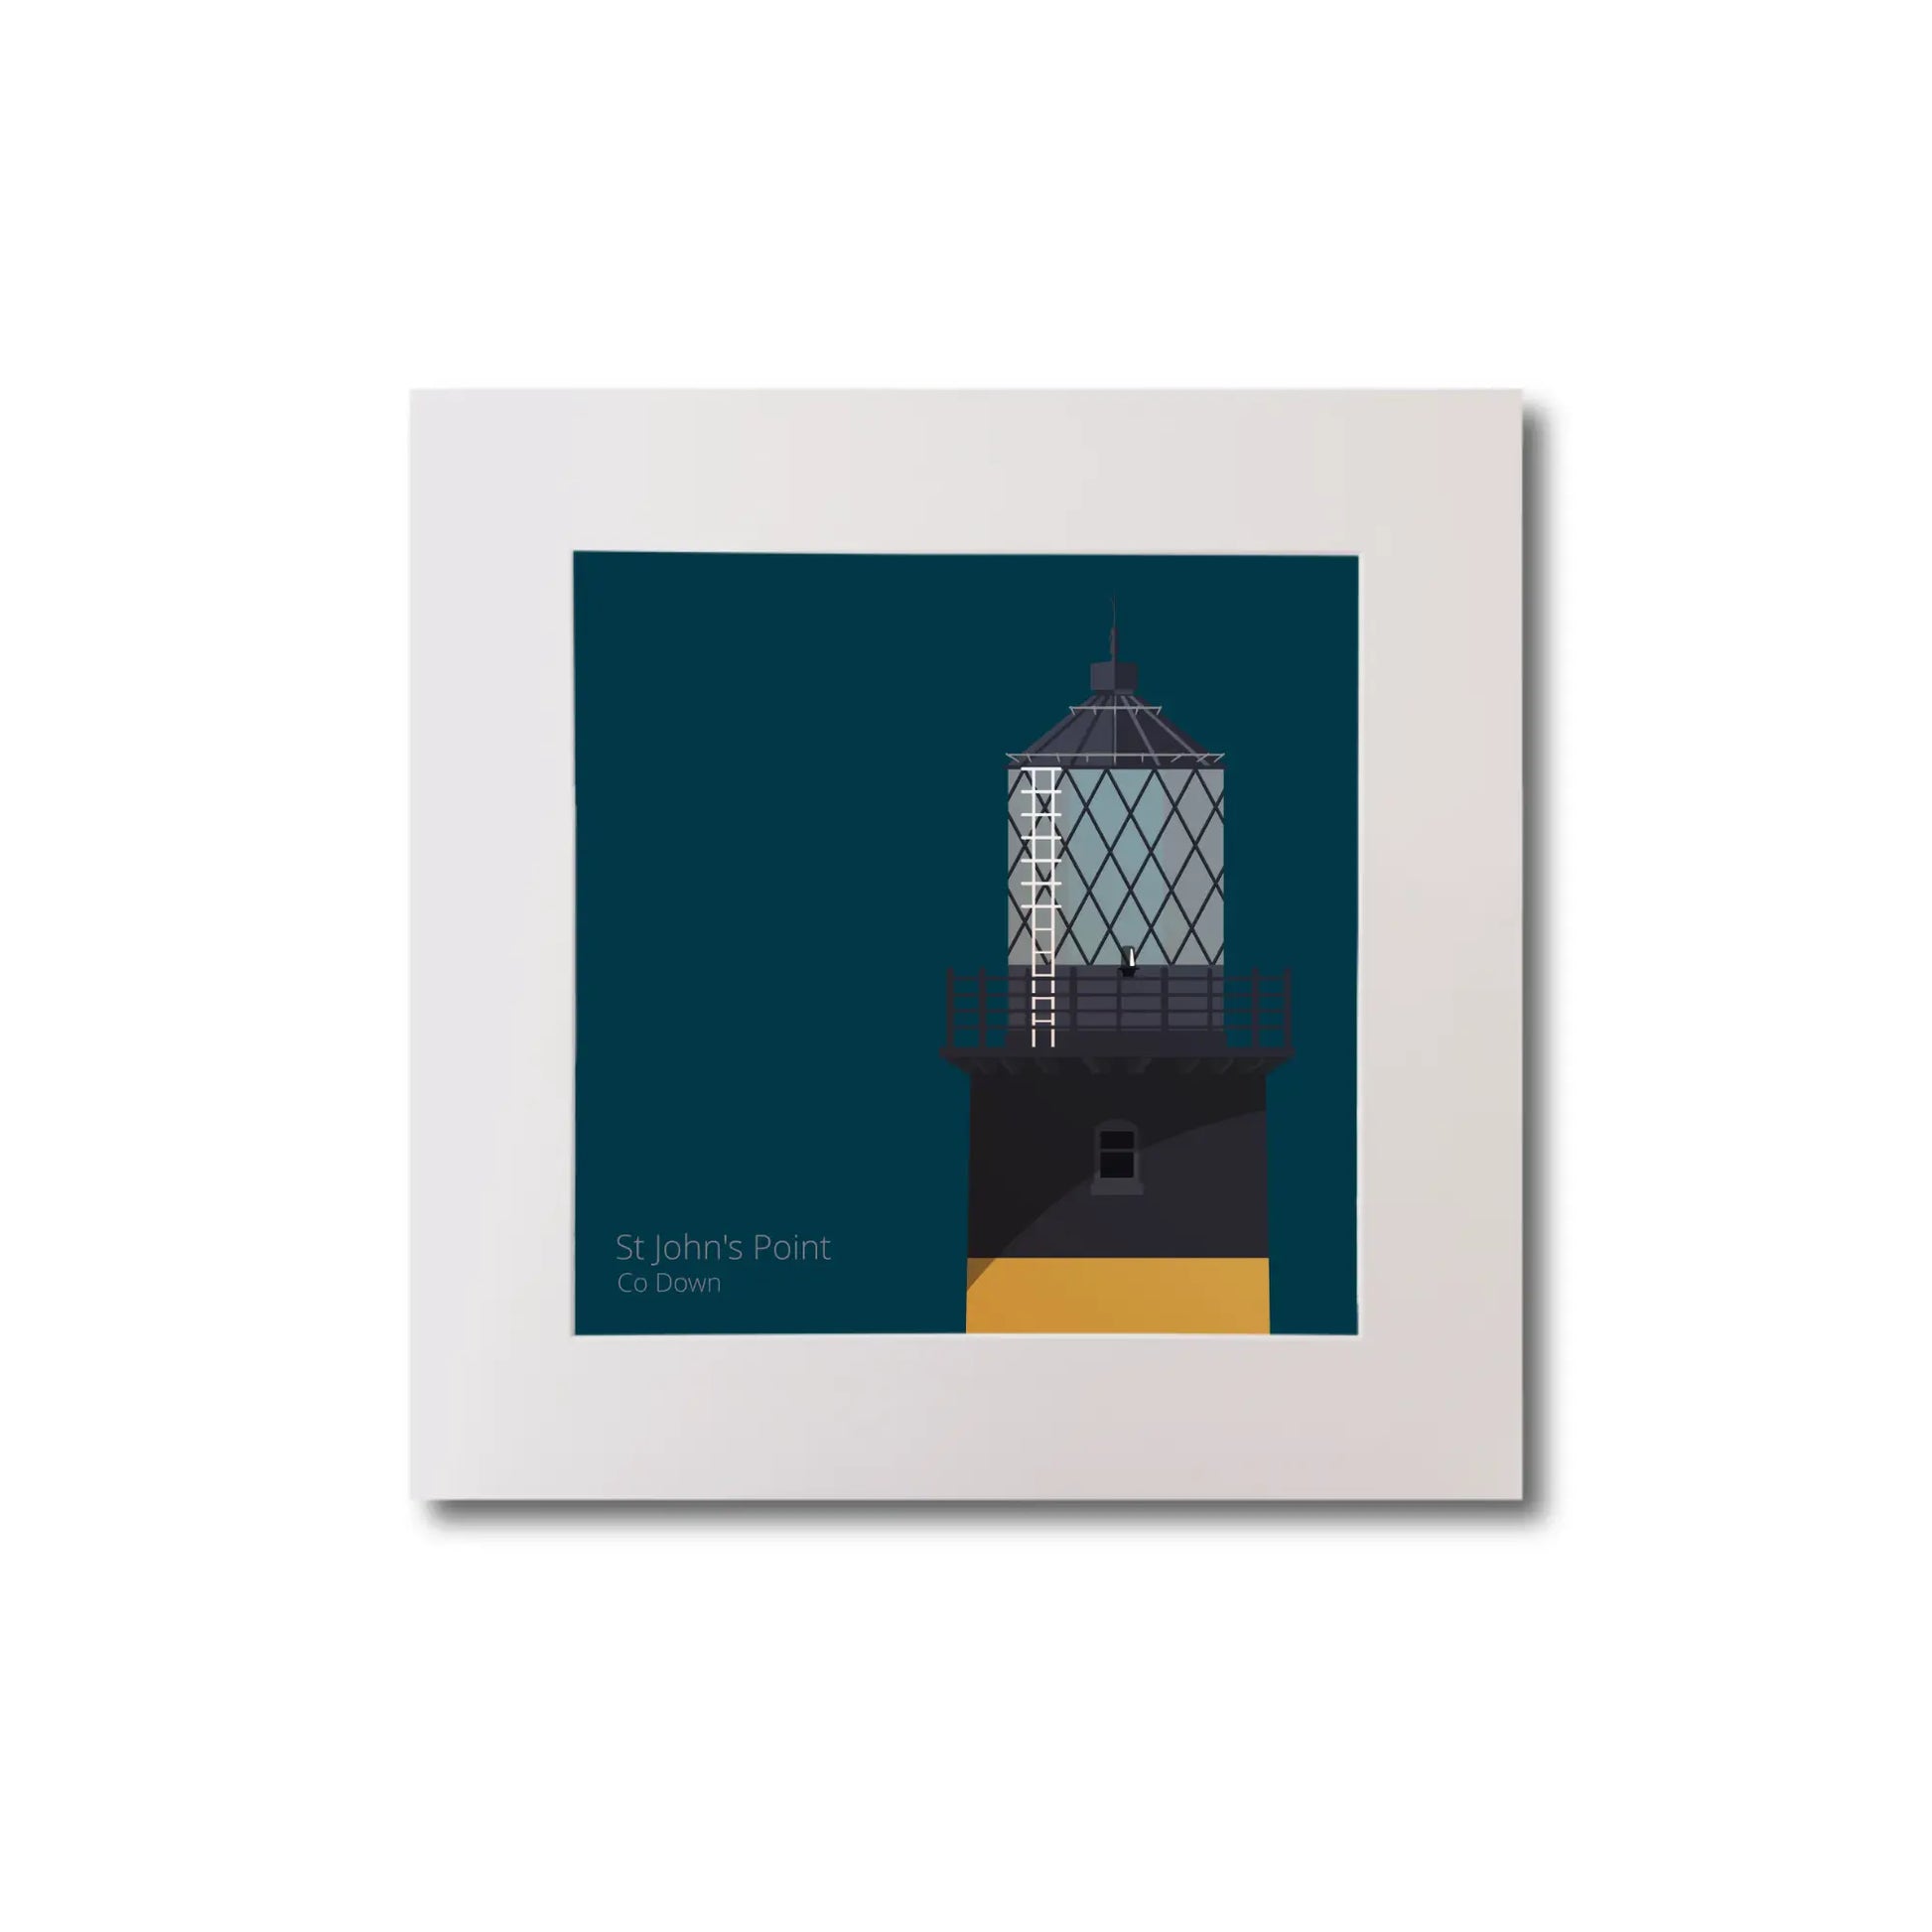 Illustration of St.John's (Down) lighthouse on a midnight blue background, mounted and measuring 20x20cm.